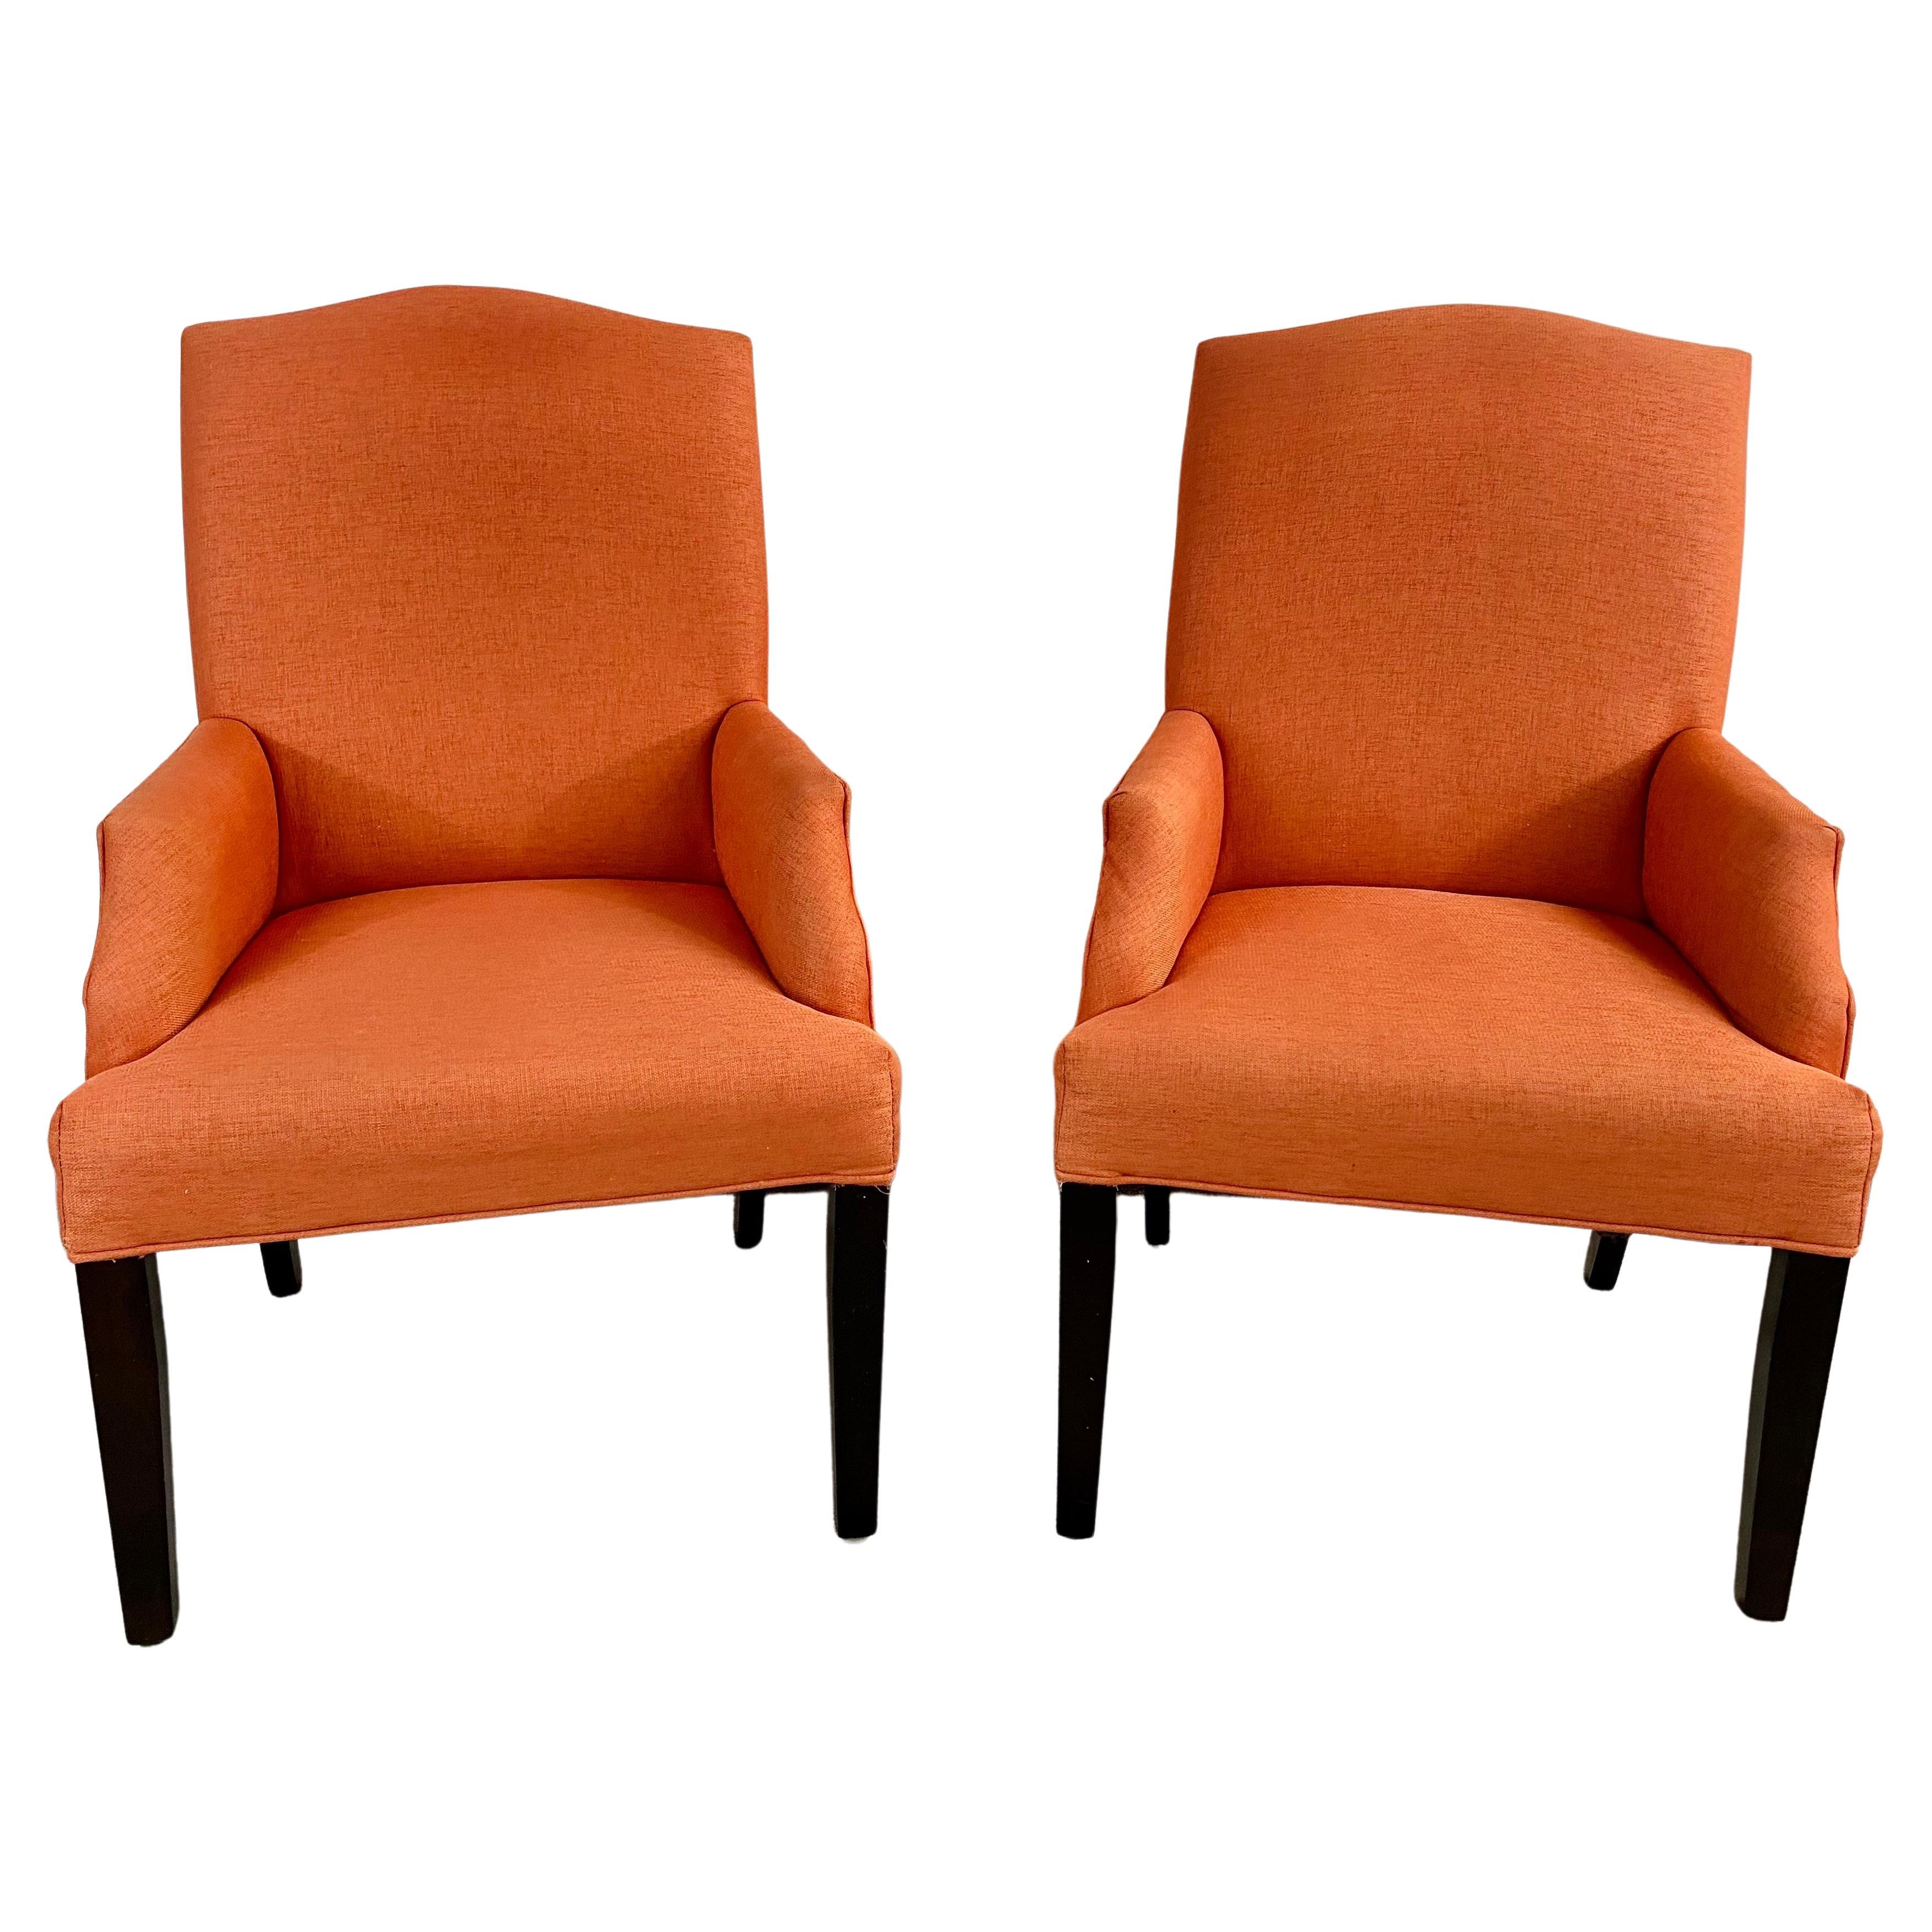 Edward Wormly Style Lounge or Side Chairs in Orange Hermes Upholstery, Pair 